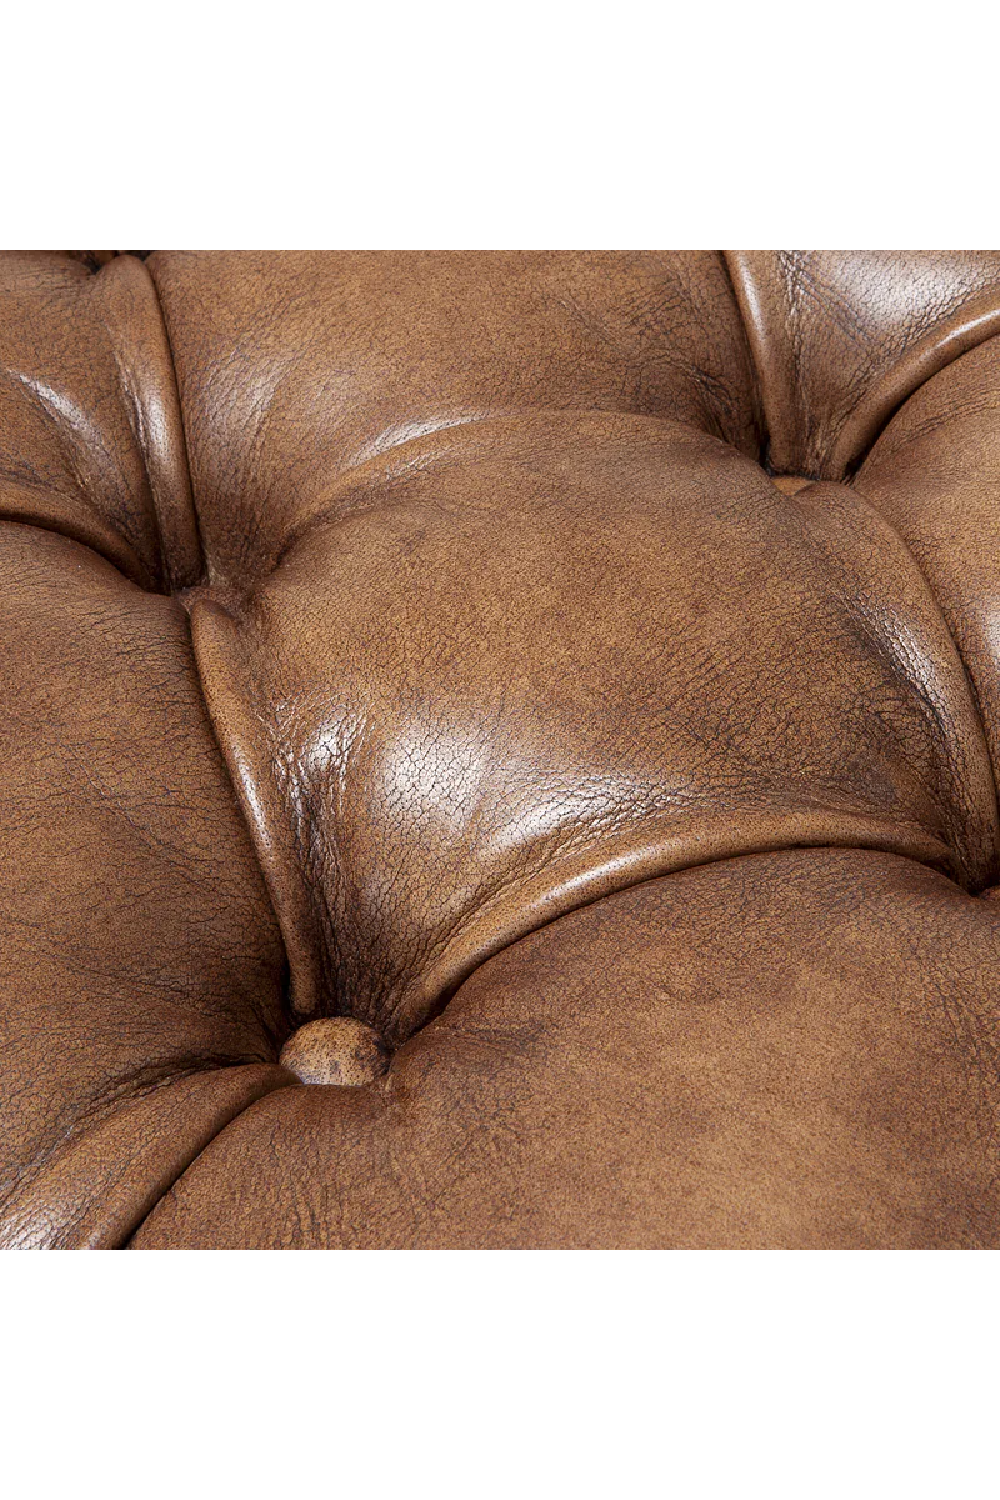 Brown Leather Buttoned Bench | Eichholtz York | Oroa.com